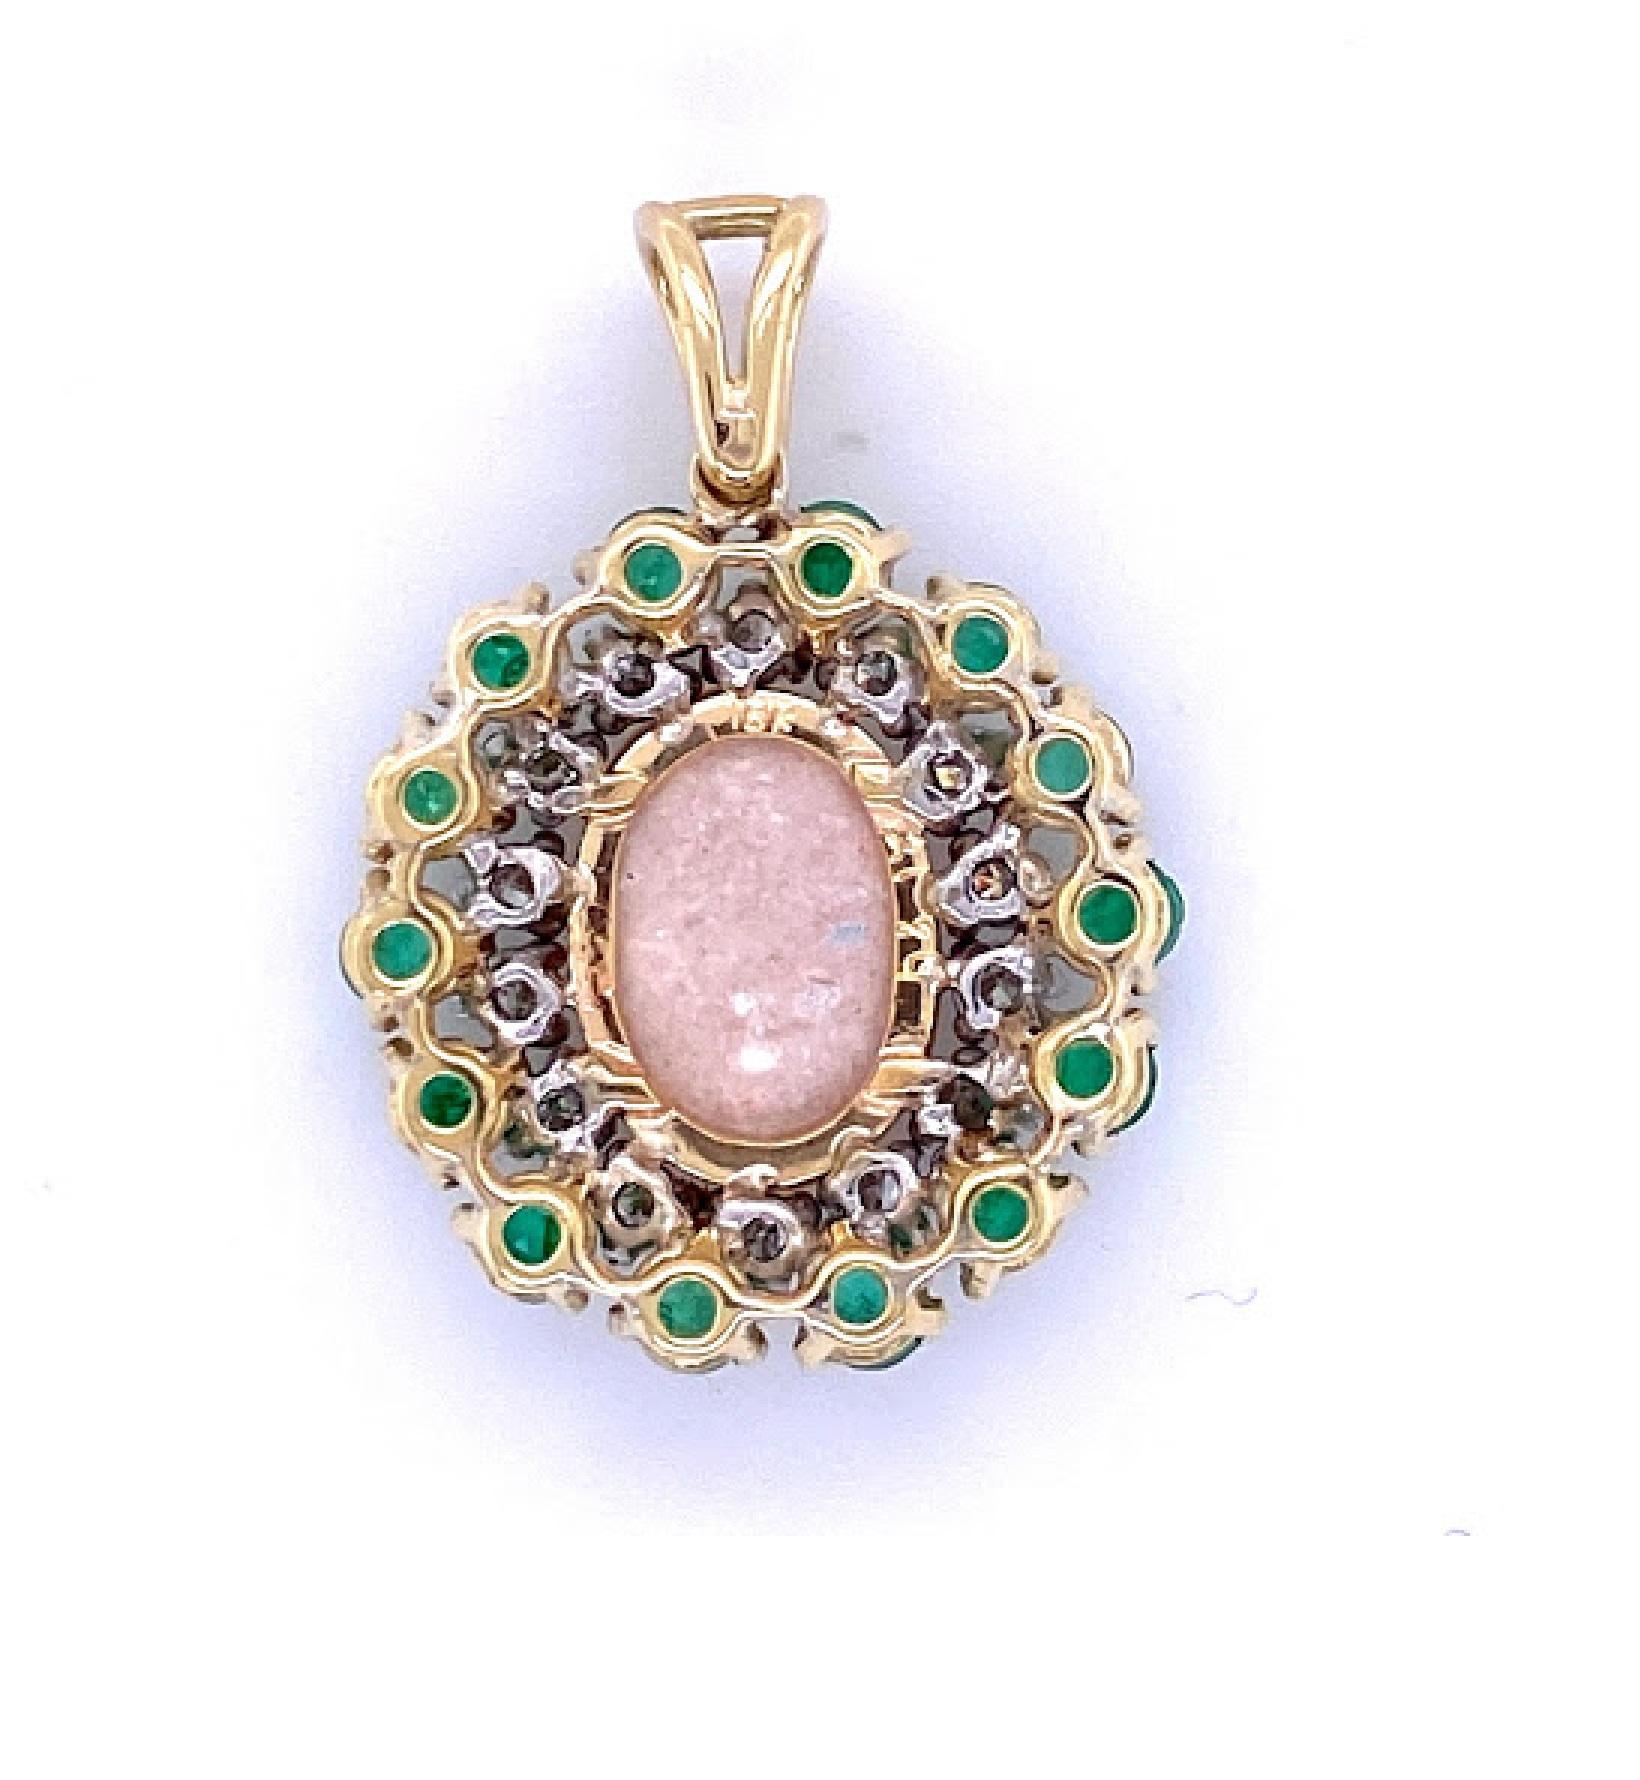 18 karat yellow gold pendant featuring a 14.5 mm by 10 mm opal. There are 14 3 mm round emerald stones on the outer edge of the pendant, with 0.90 carat of round brilliant diamonds between the line of emeralds and the opal. The gemstone design